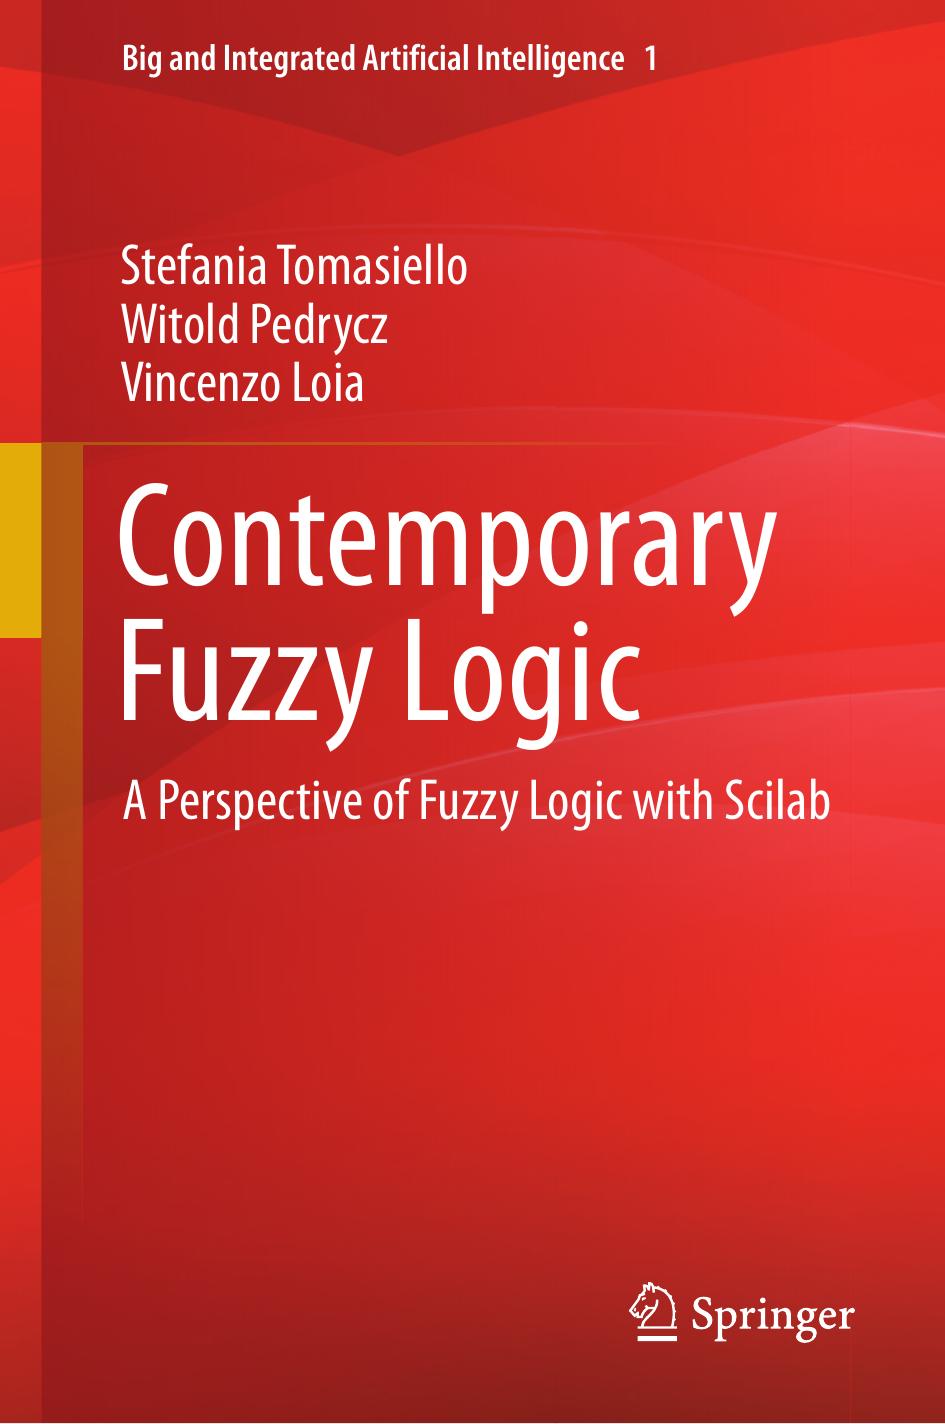 Contemporary Fuzzy Logic: A Perspective of Fuzzy Logic with Scilab